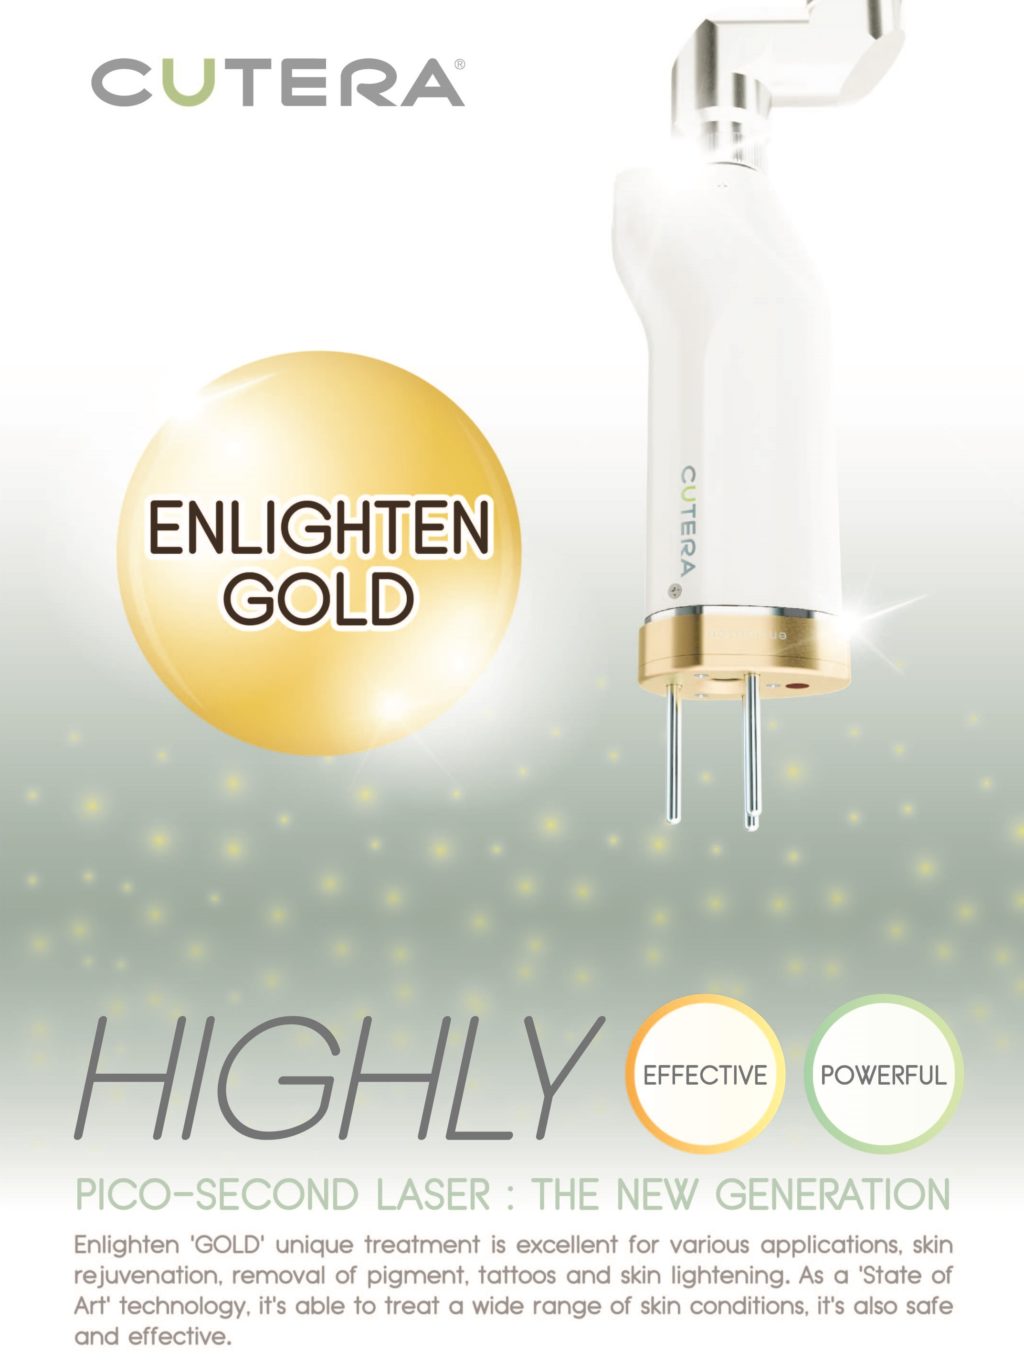 Take Years Off Your Face with the Enlighten Gold treatment